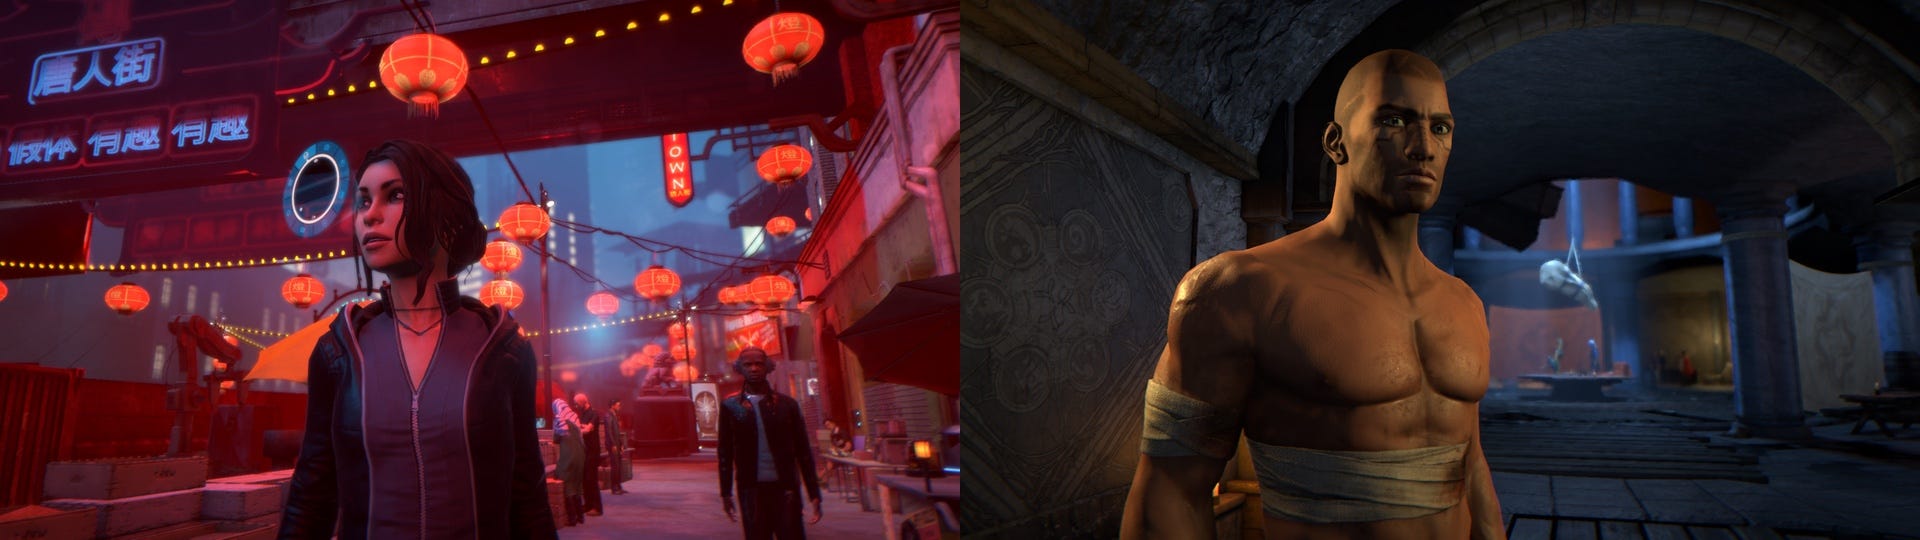 Dreamfall Chapters, Extreme Makeover Edition, or: The Rocky Road to Unity 5  | by Ragnar Tørnquist | Medium